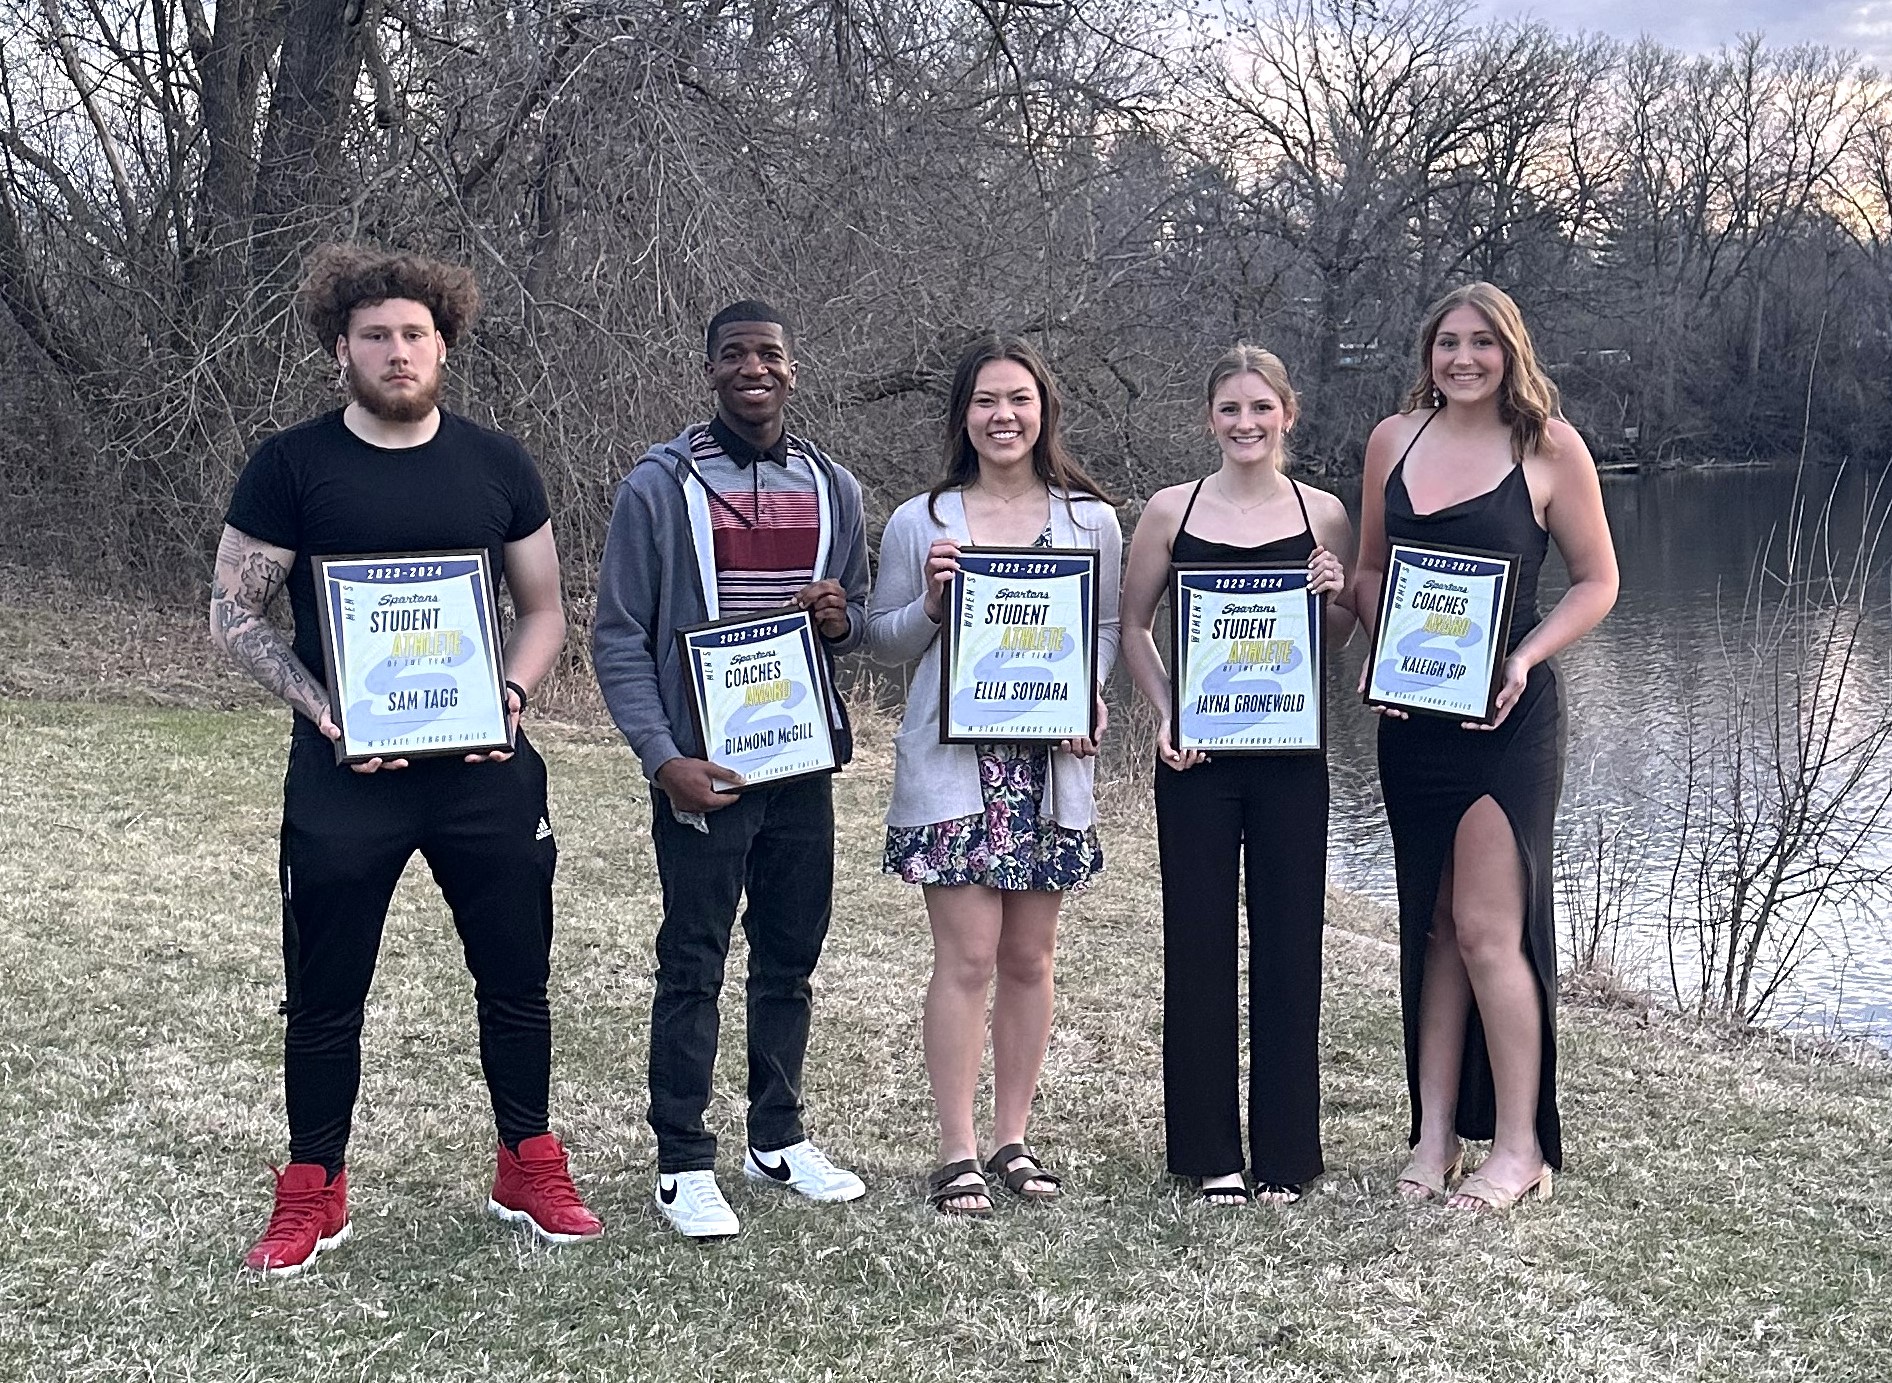 This year’s M State Spartan athletic award winners included, left to right: Sam Tagg, Male Student Athlete of the Year; Diamond McGill, Male Coaches Award winner; Ellia Soydara, Female Student Athlete of the Year; Jayna Gronewold, Female Student Athlete of the Year; and Kaleigh Sip, Female Coaches Award winner.